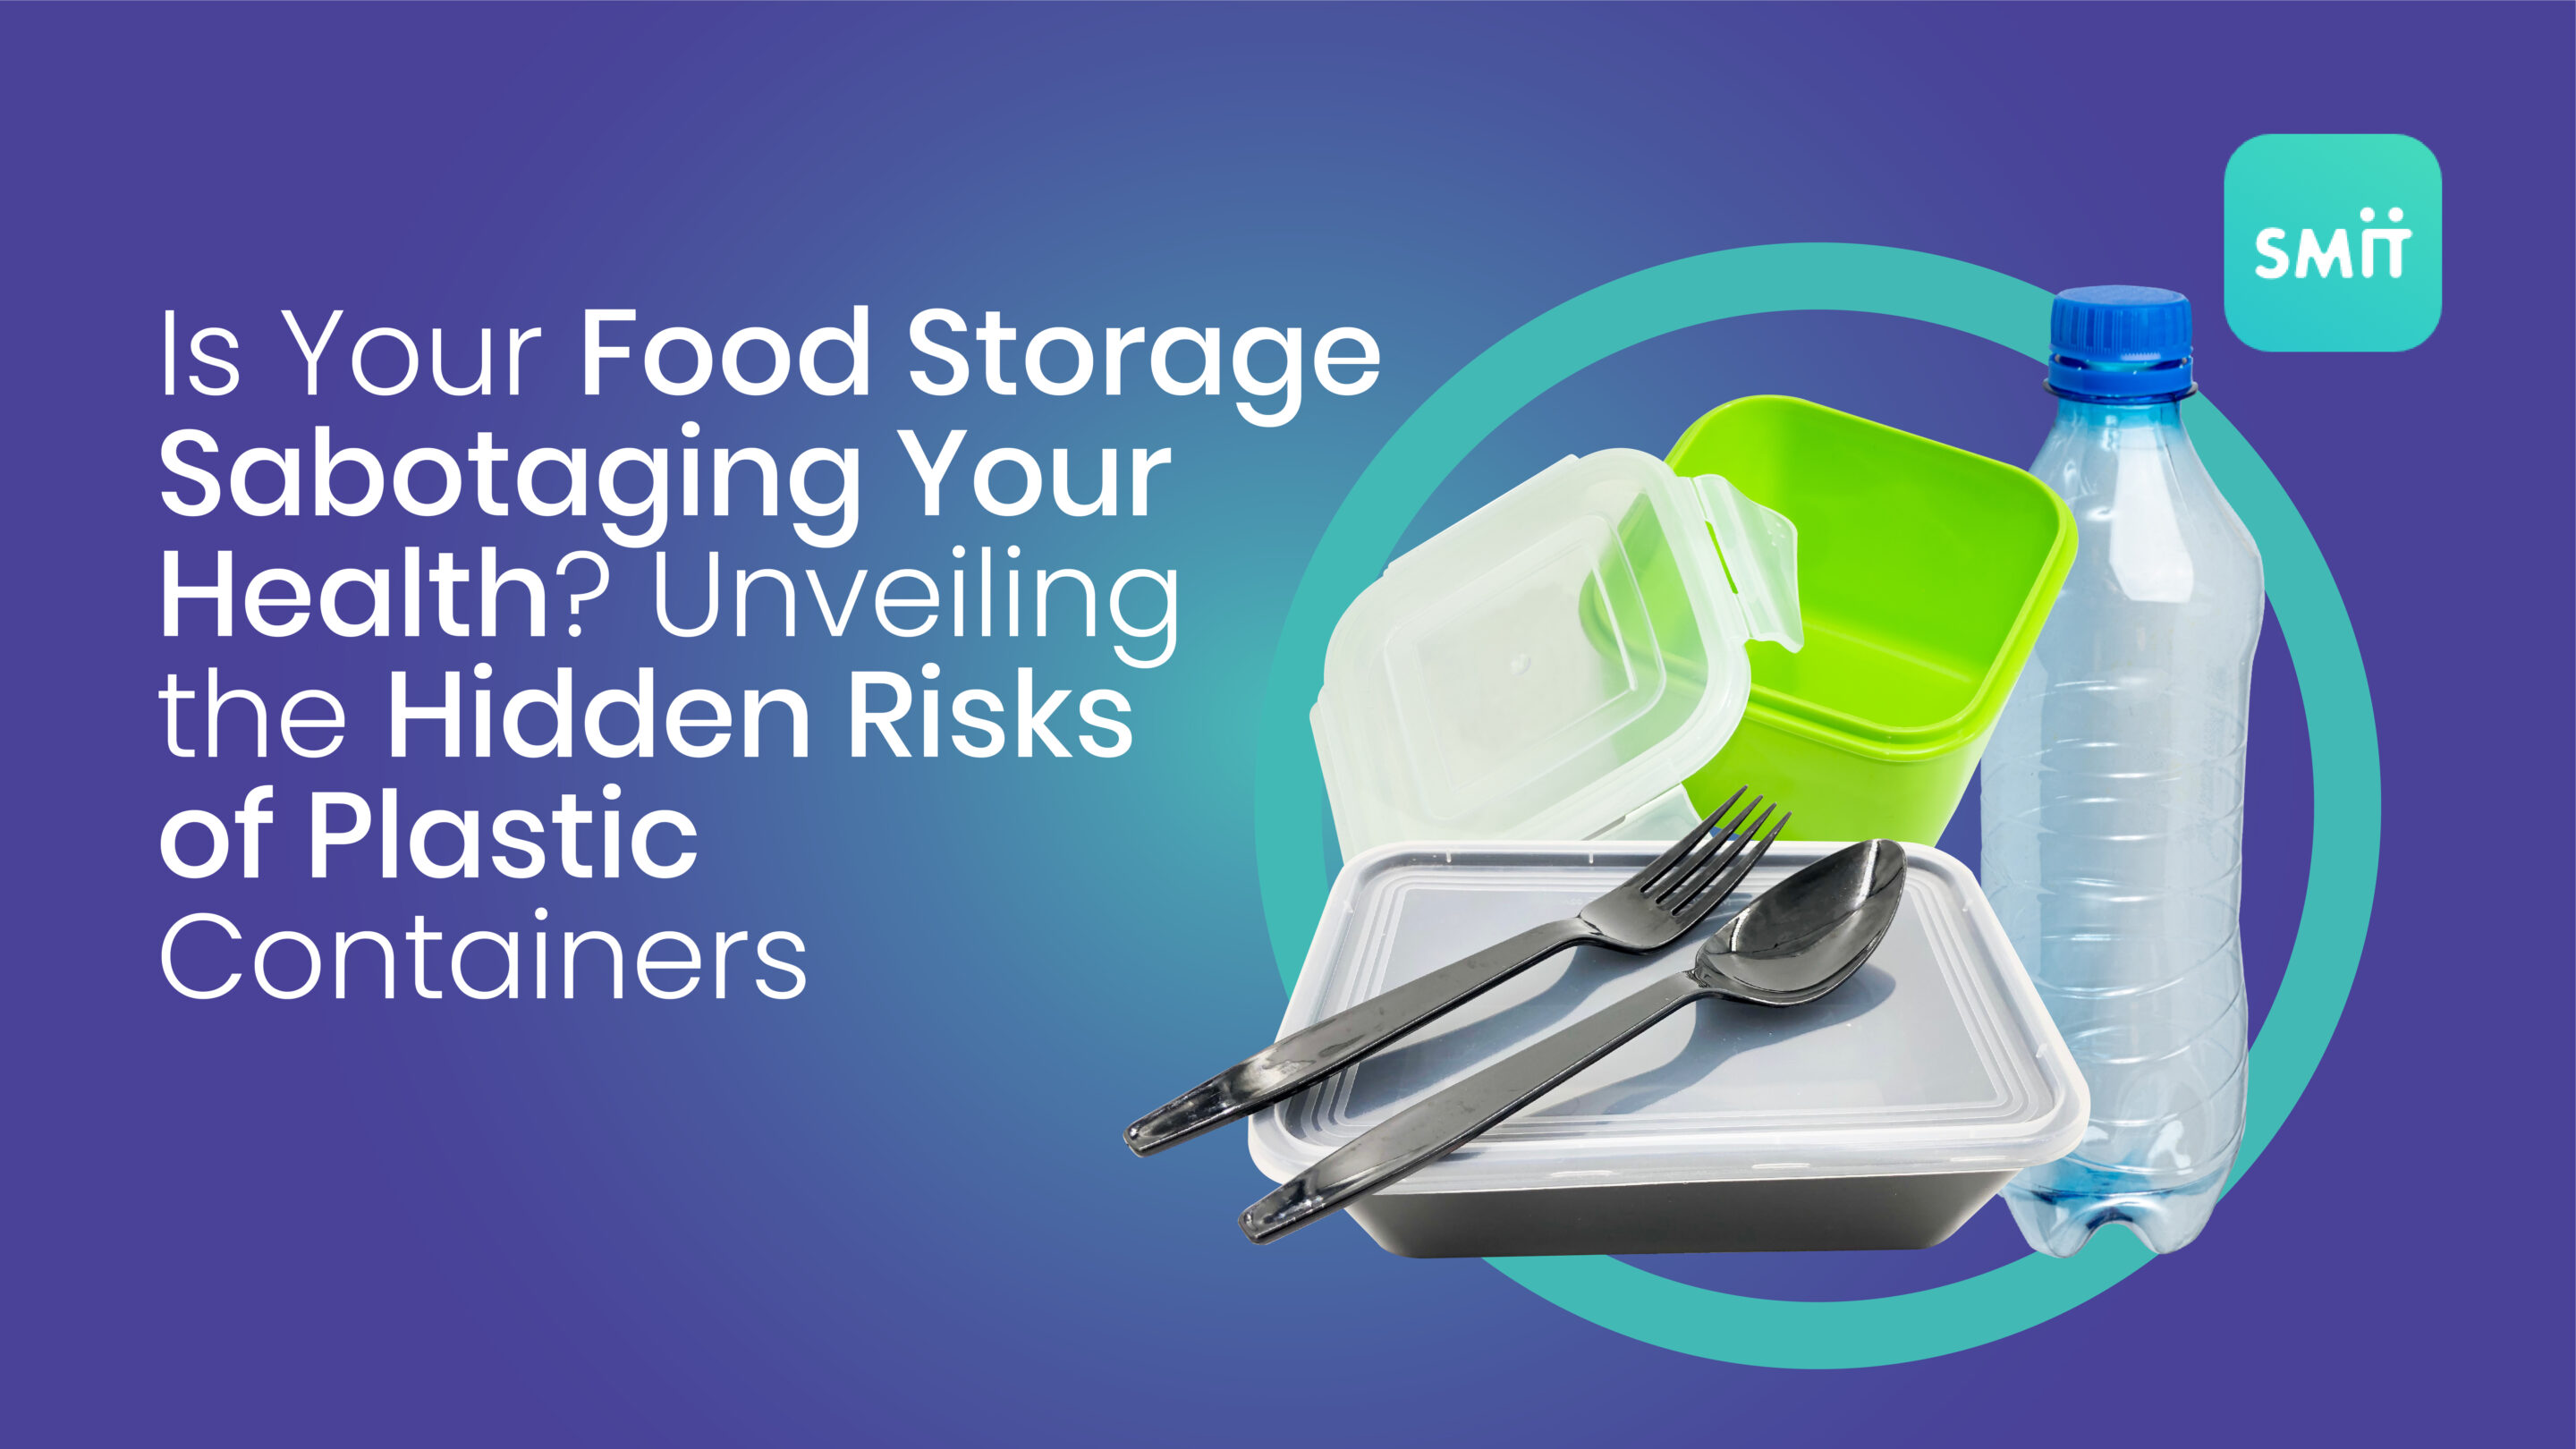 How is your food storage affecting your health?: The hidden risks of plastic containers